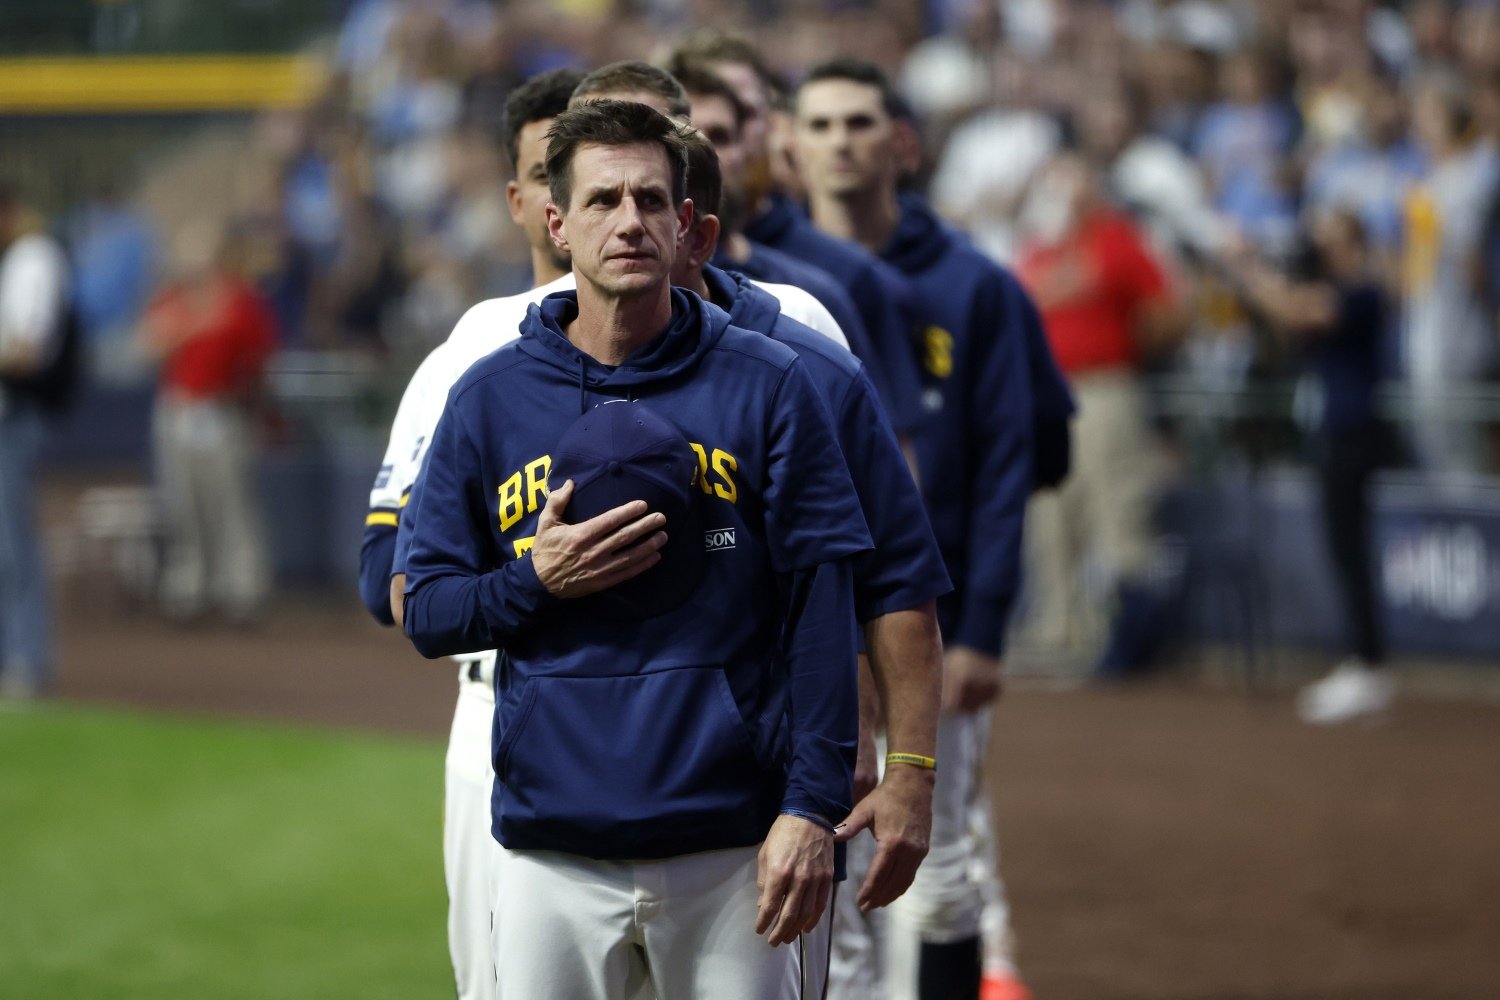 Craig Counsell's Greatest Moments, A look back at Craig Counsell's  greatest moments., By Arizona Diamondbacks Highlights